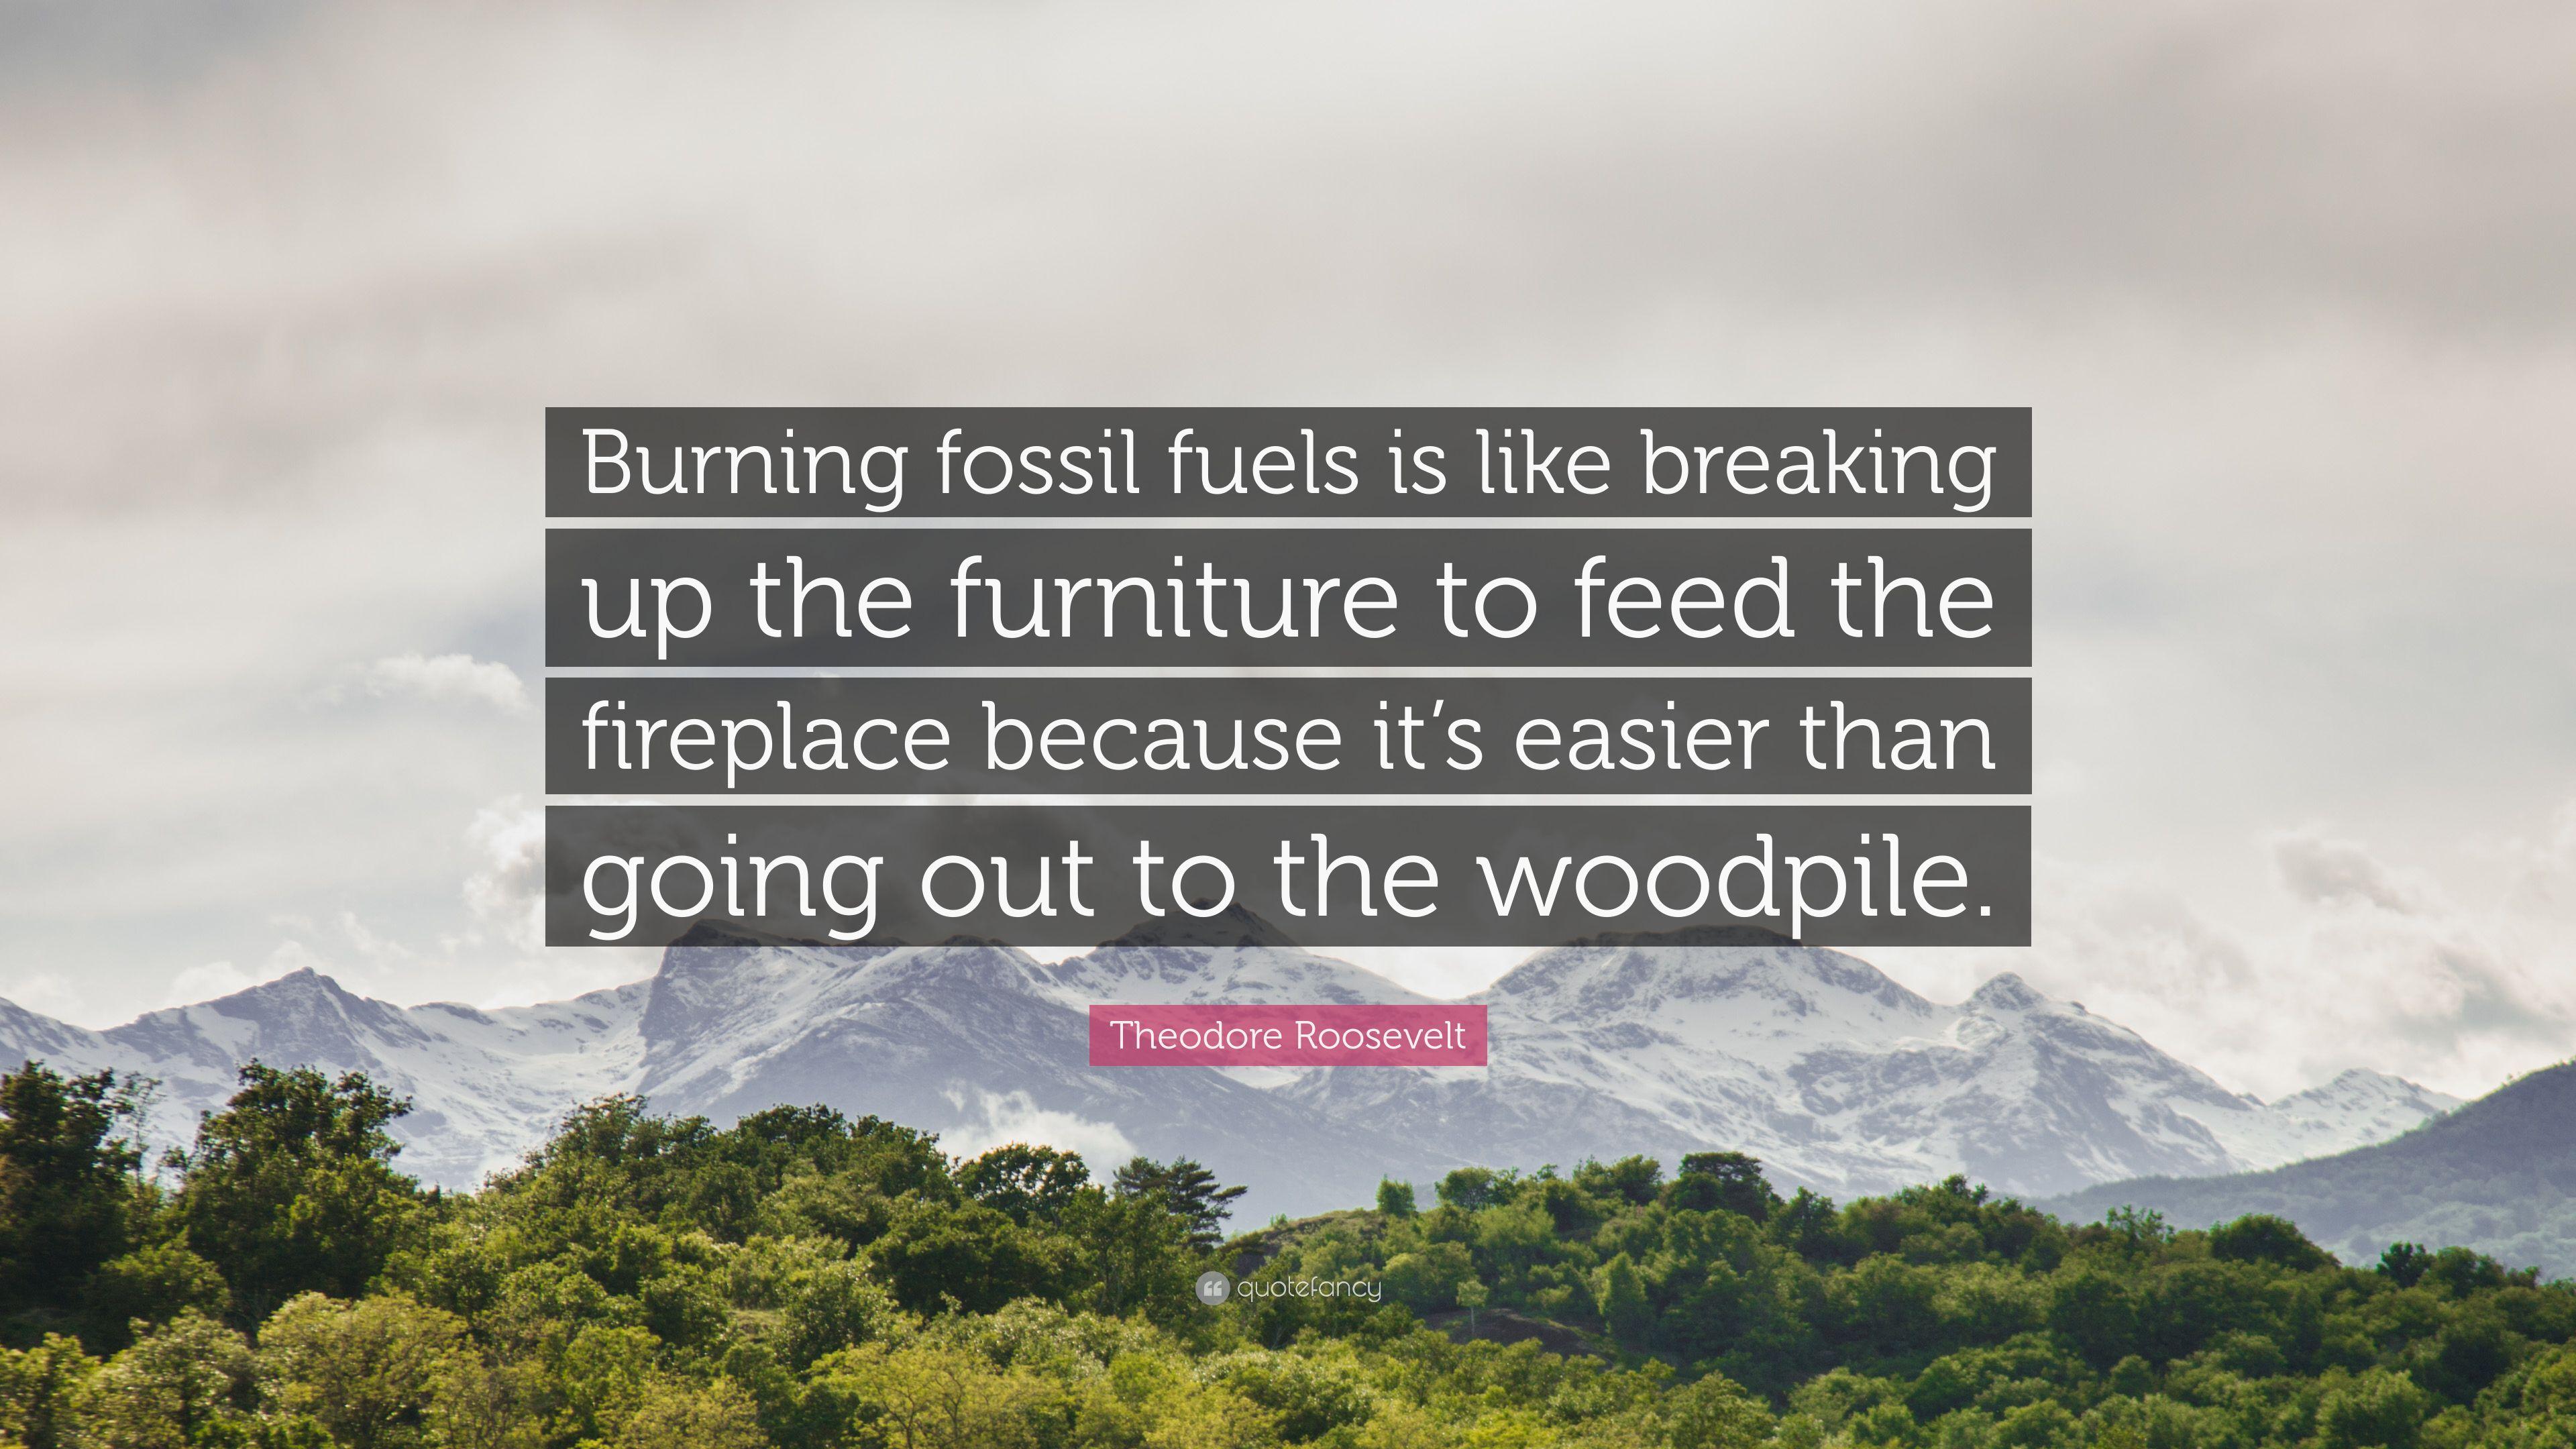 Theodore Roosevelt Quote: “Burning fossil fuels is like breaking up